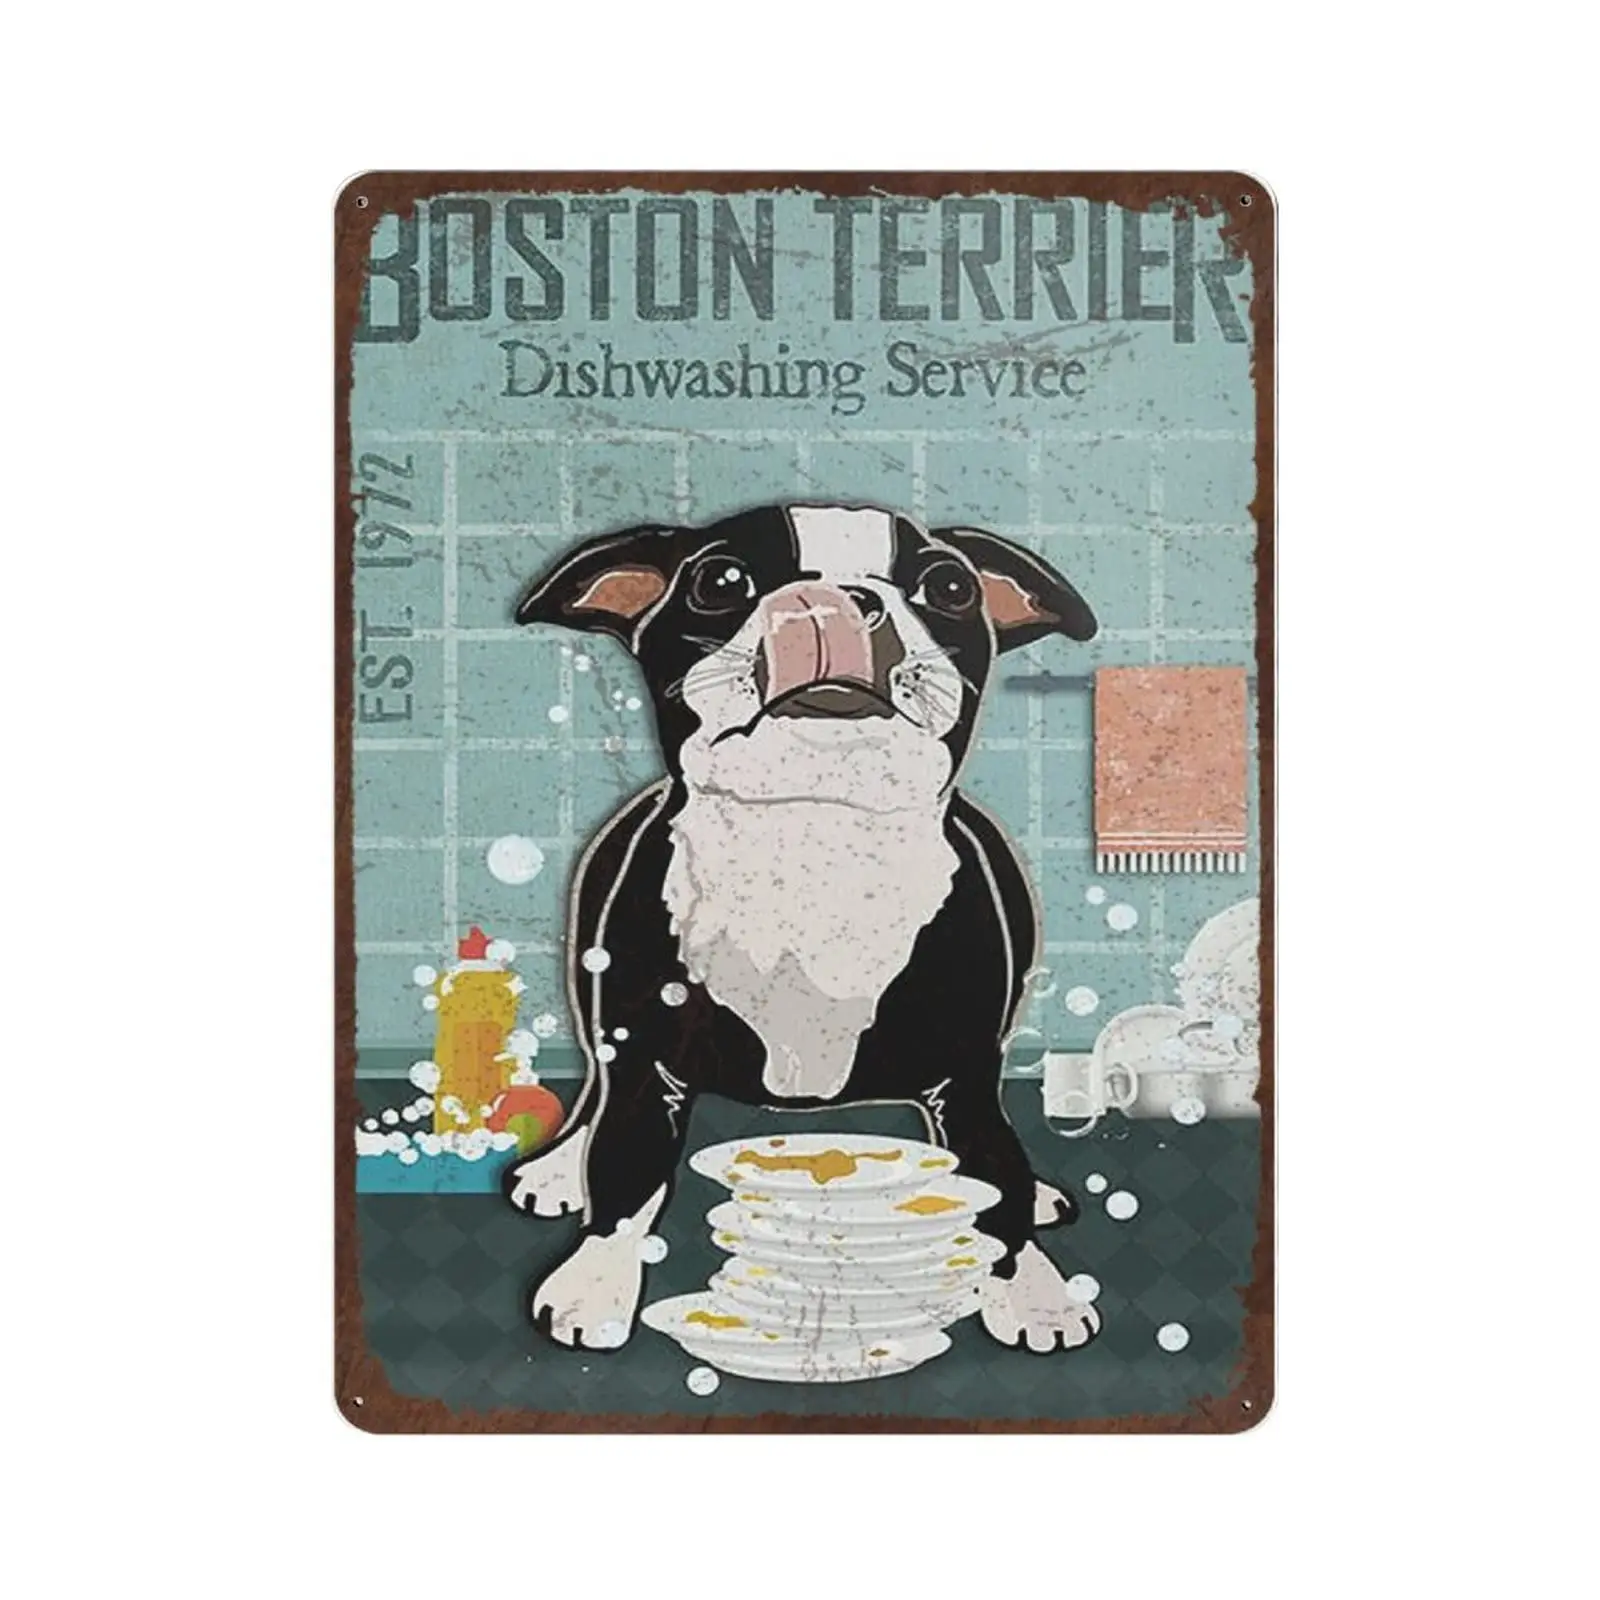 

Antique Durable Thick Metal Sign,Boston Terrier Dog Dishwashing Service Tin SIign,Vintage Wall Decor，Novelty Signs for Home Kitc